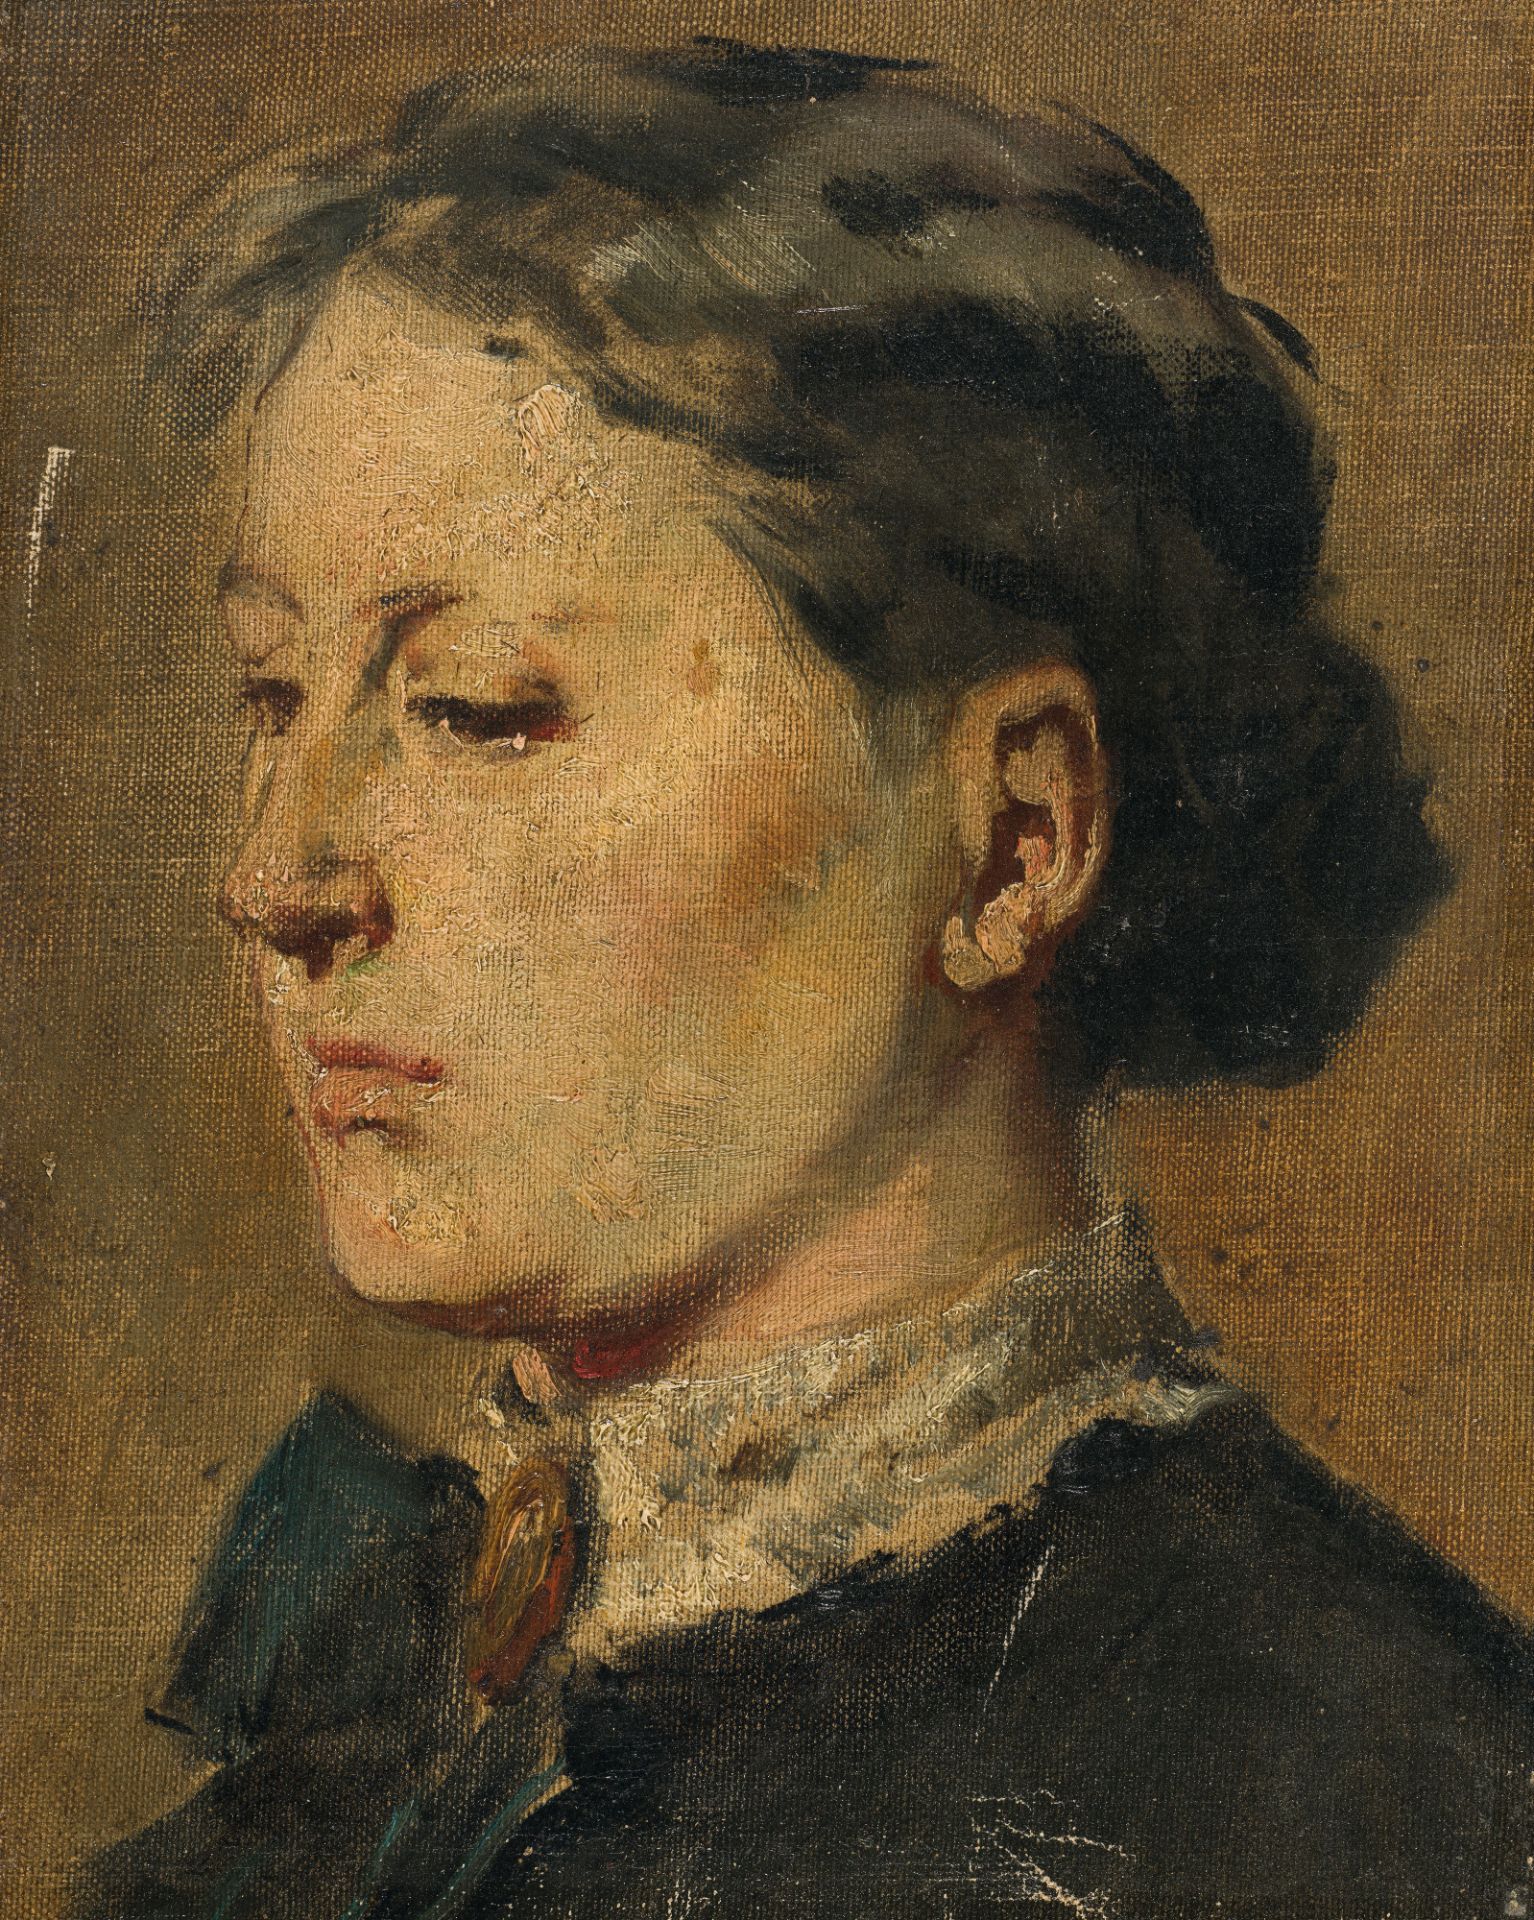 Artist of the 19th/20th century: Portrait of a woman